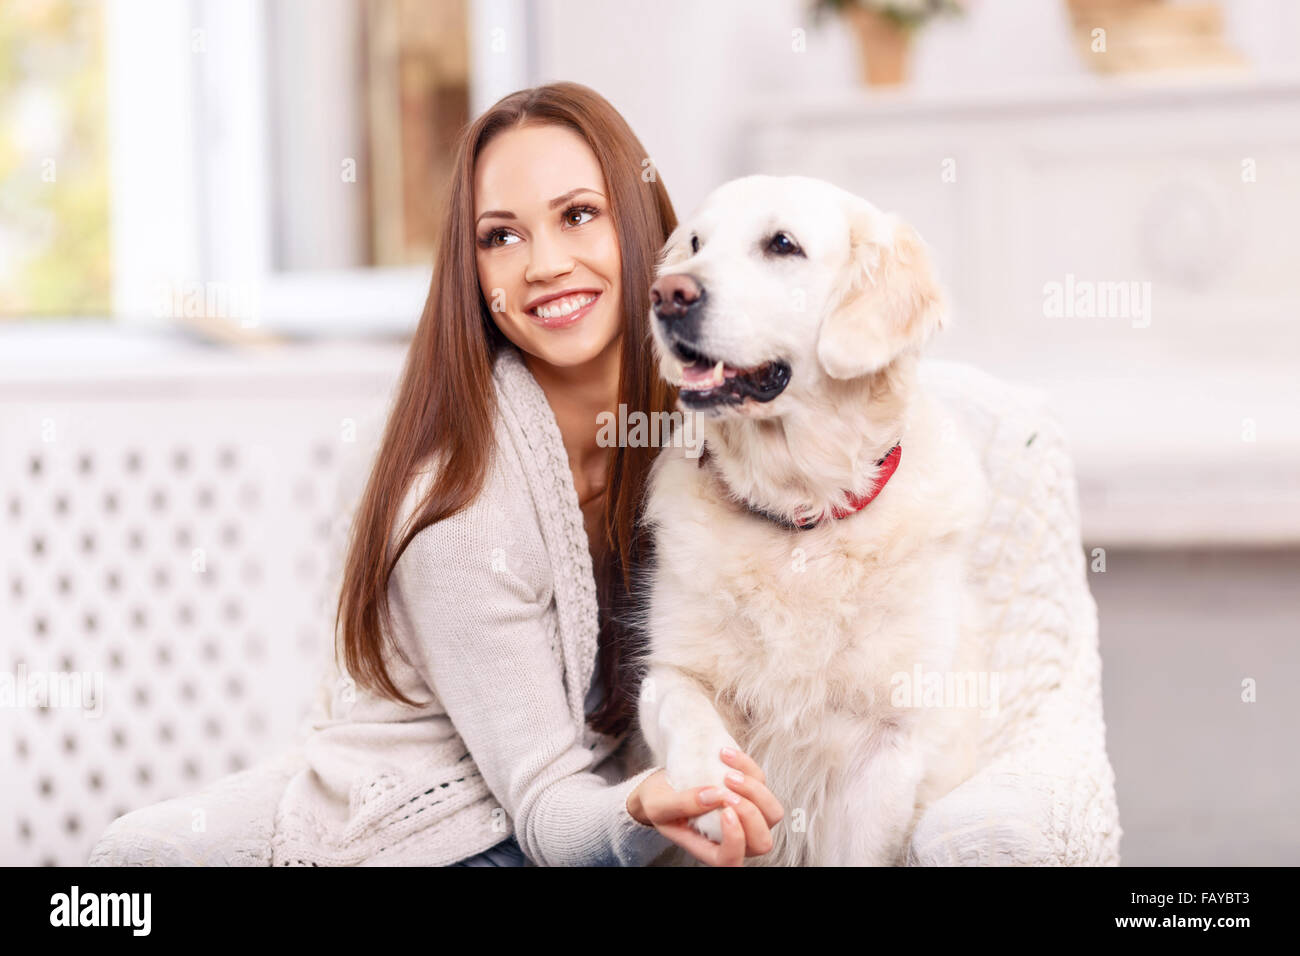 Lovely girl is smiling vividly while caressing a dog. Stock Photo